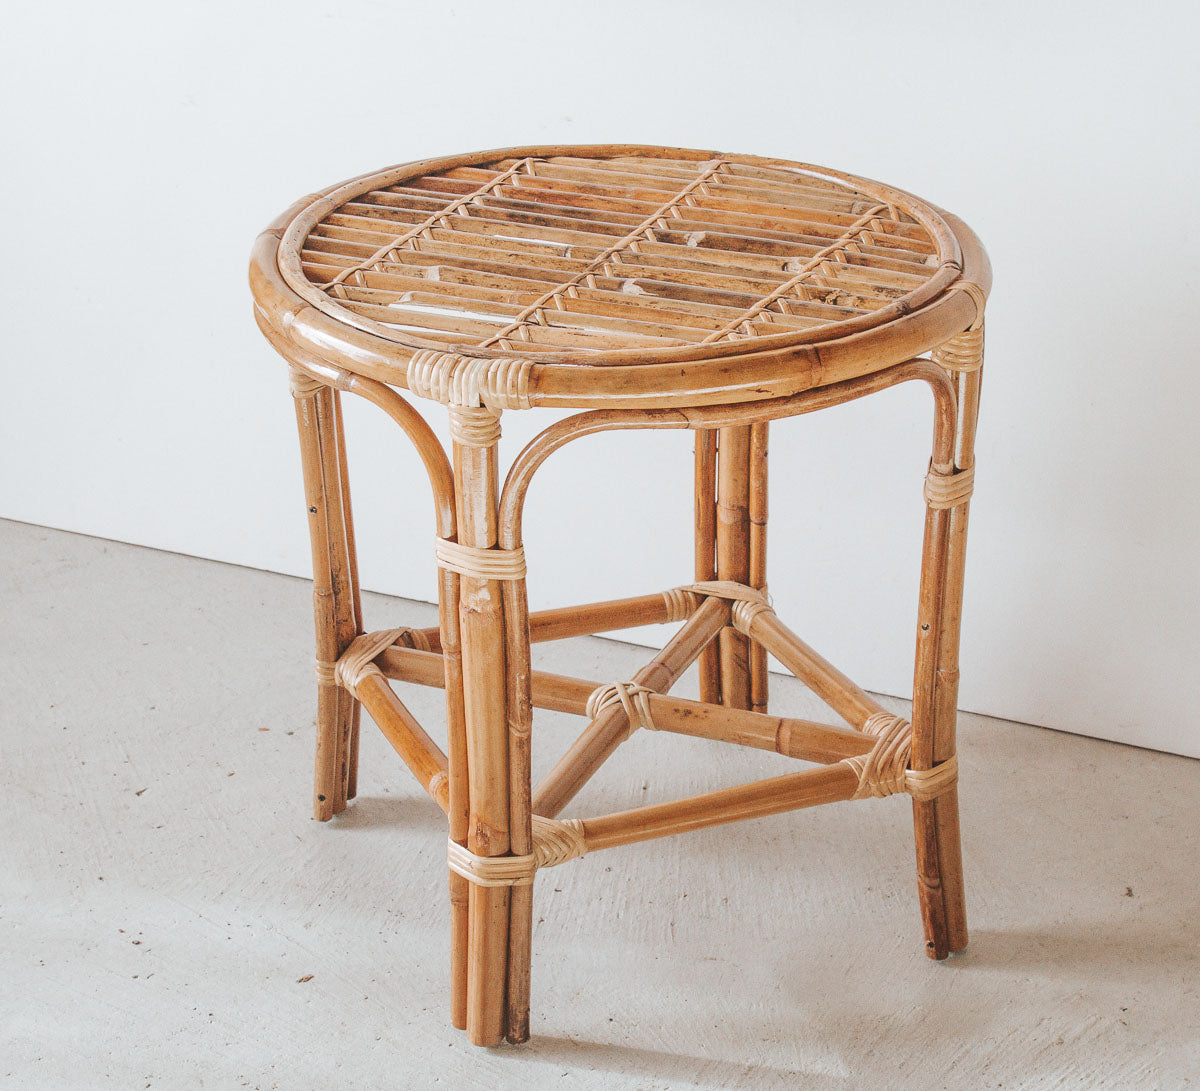 boho bohemian round cane rattan bamboo side table bedside table coffee table